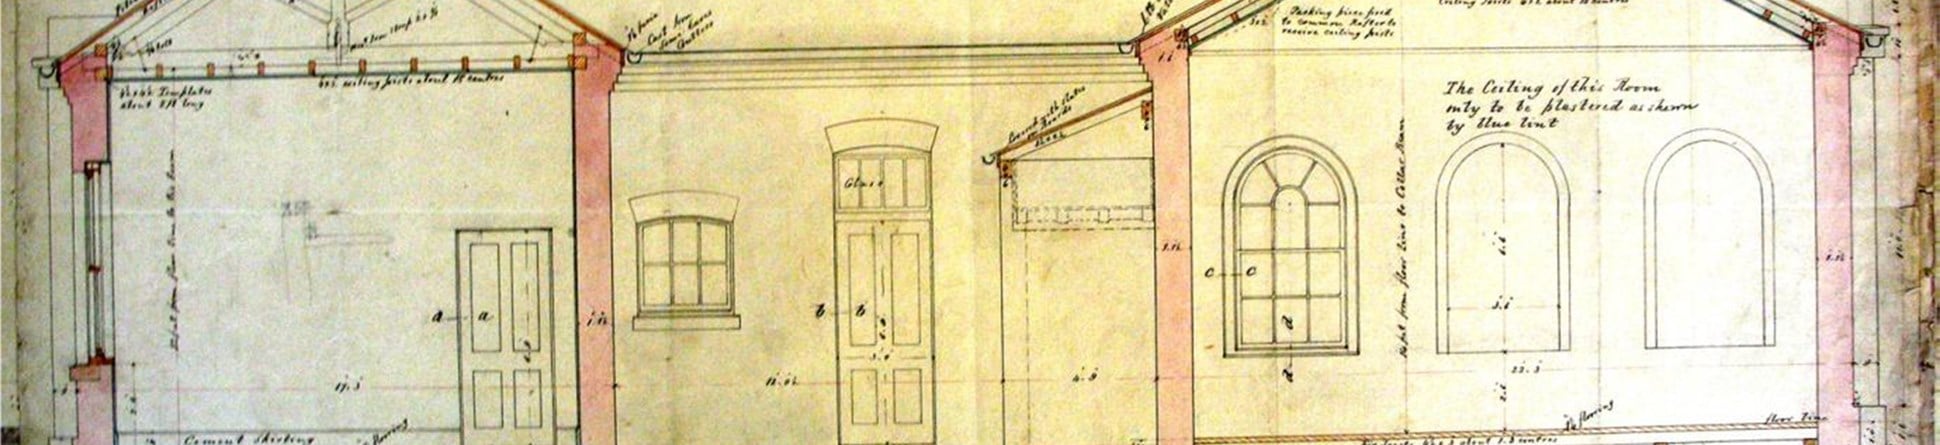 Measured drawing of Police Barrack and Guard House